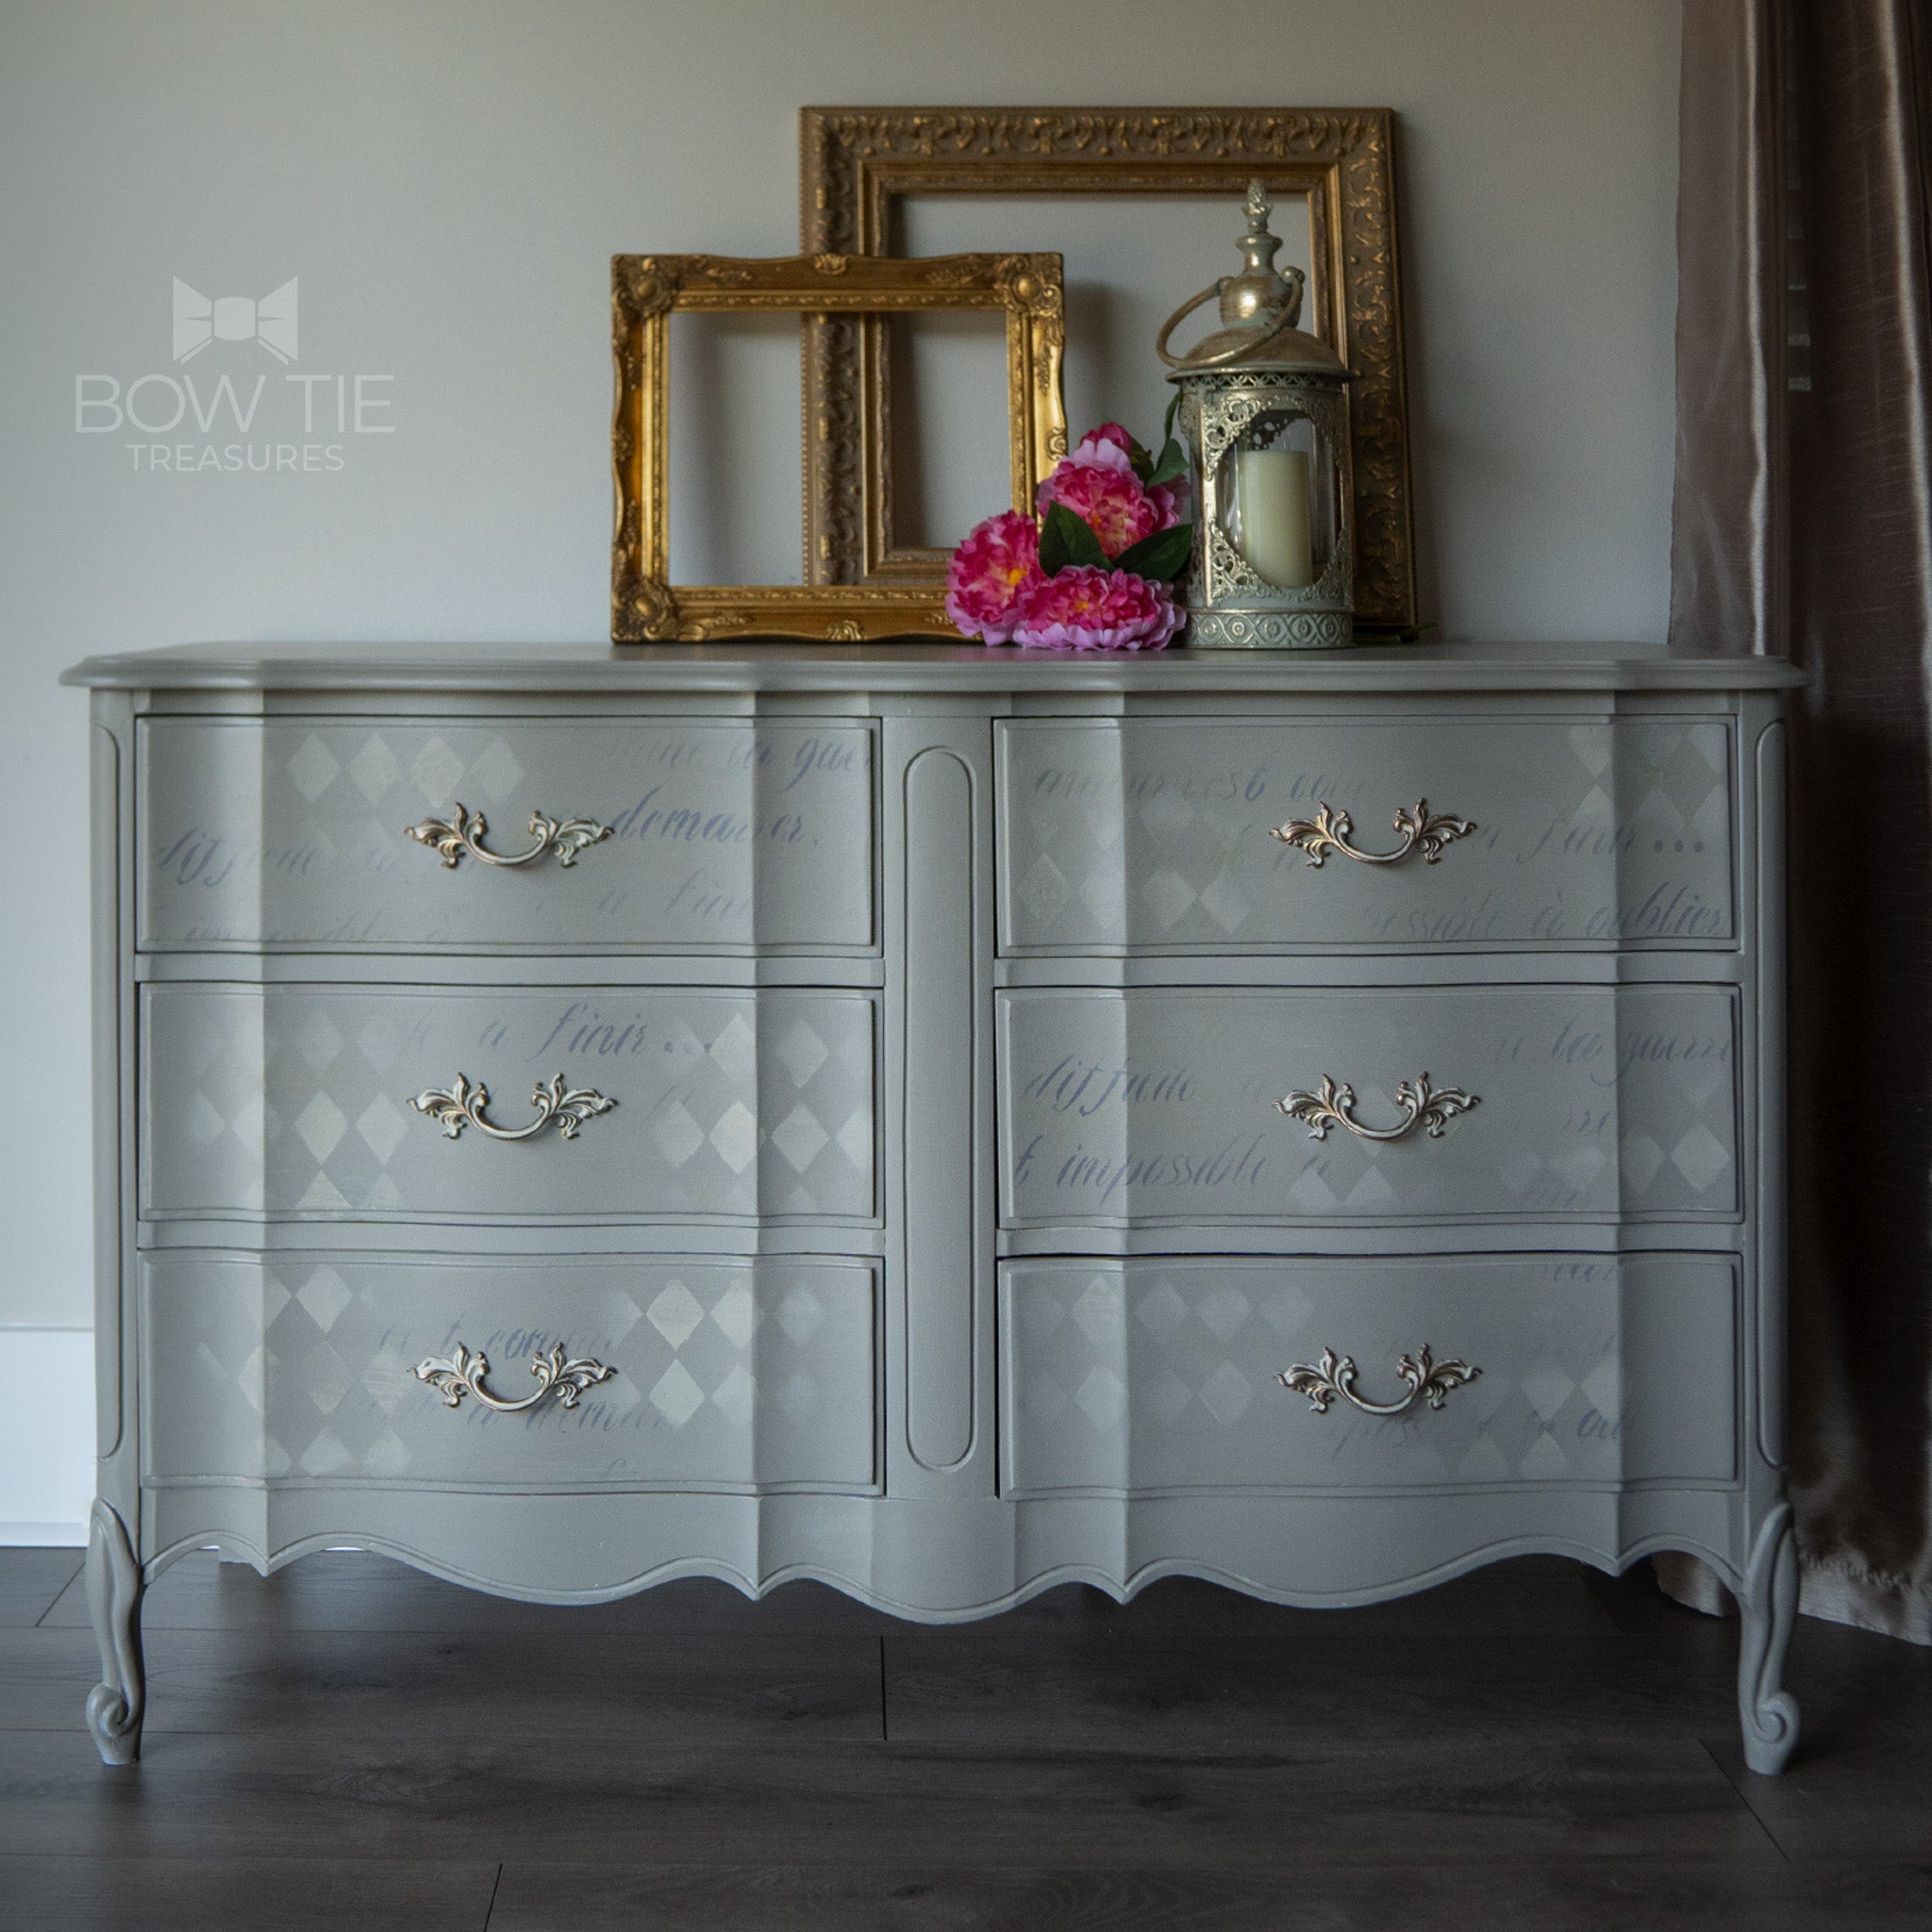 A vintage 6-drawer dresser refurbished by Bow Tie Treasure is painted in Dixie Belle's Mason Dixon chalk mineral paint and has a ghost painted Harlequin diamond pattern and faint script writing.